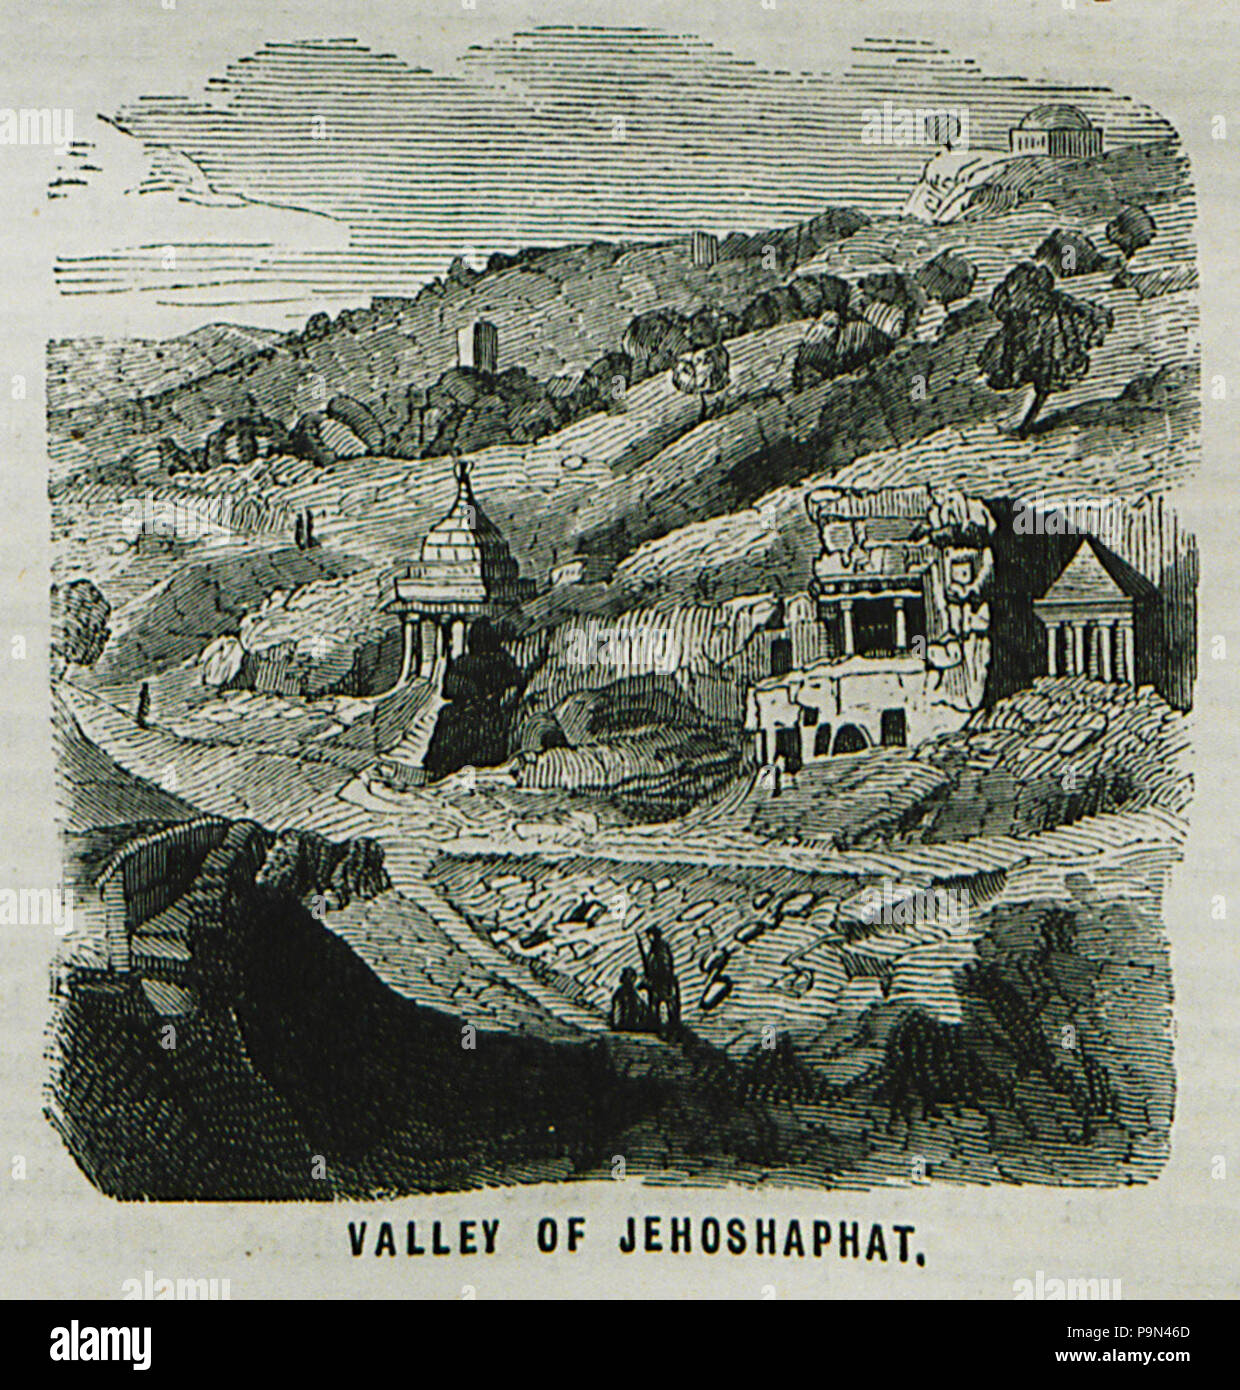 321 Valley of Jehoshaphat - Ainsworth William Francis - 1870 Stock Photo